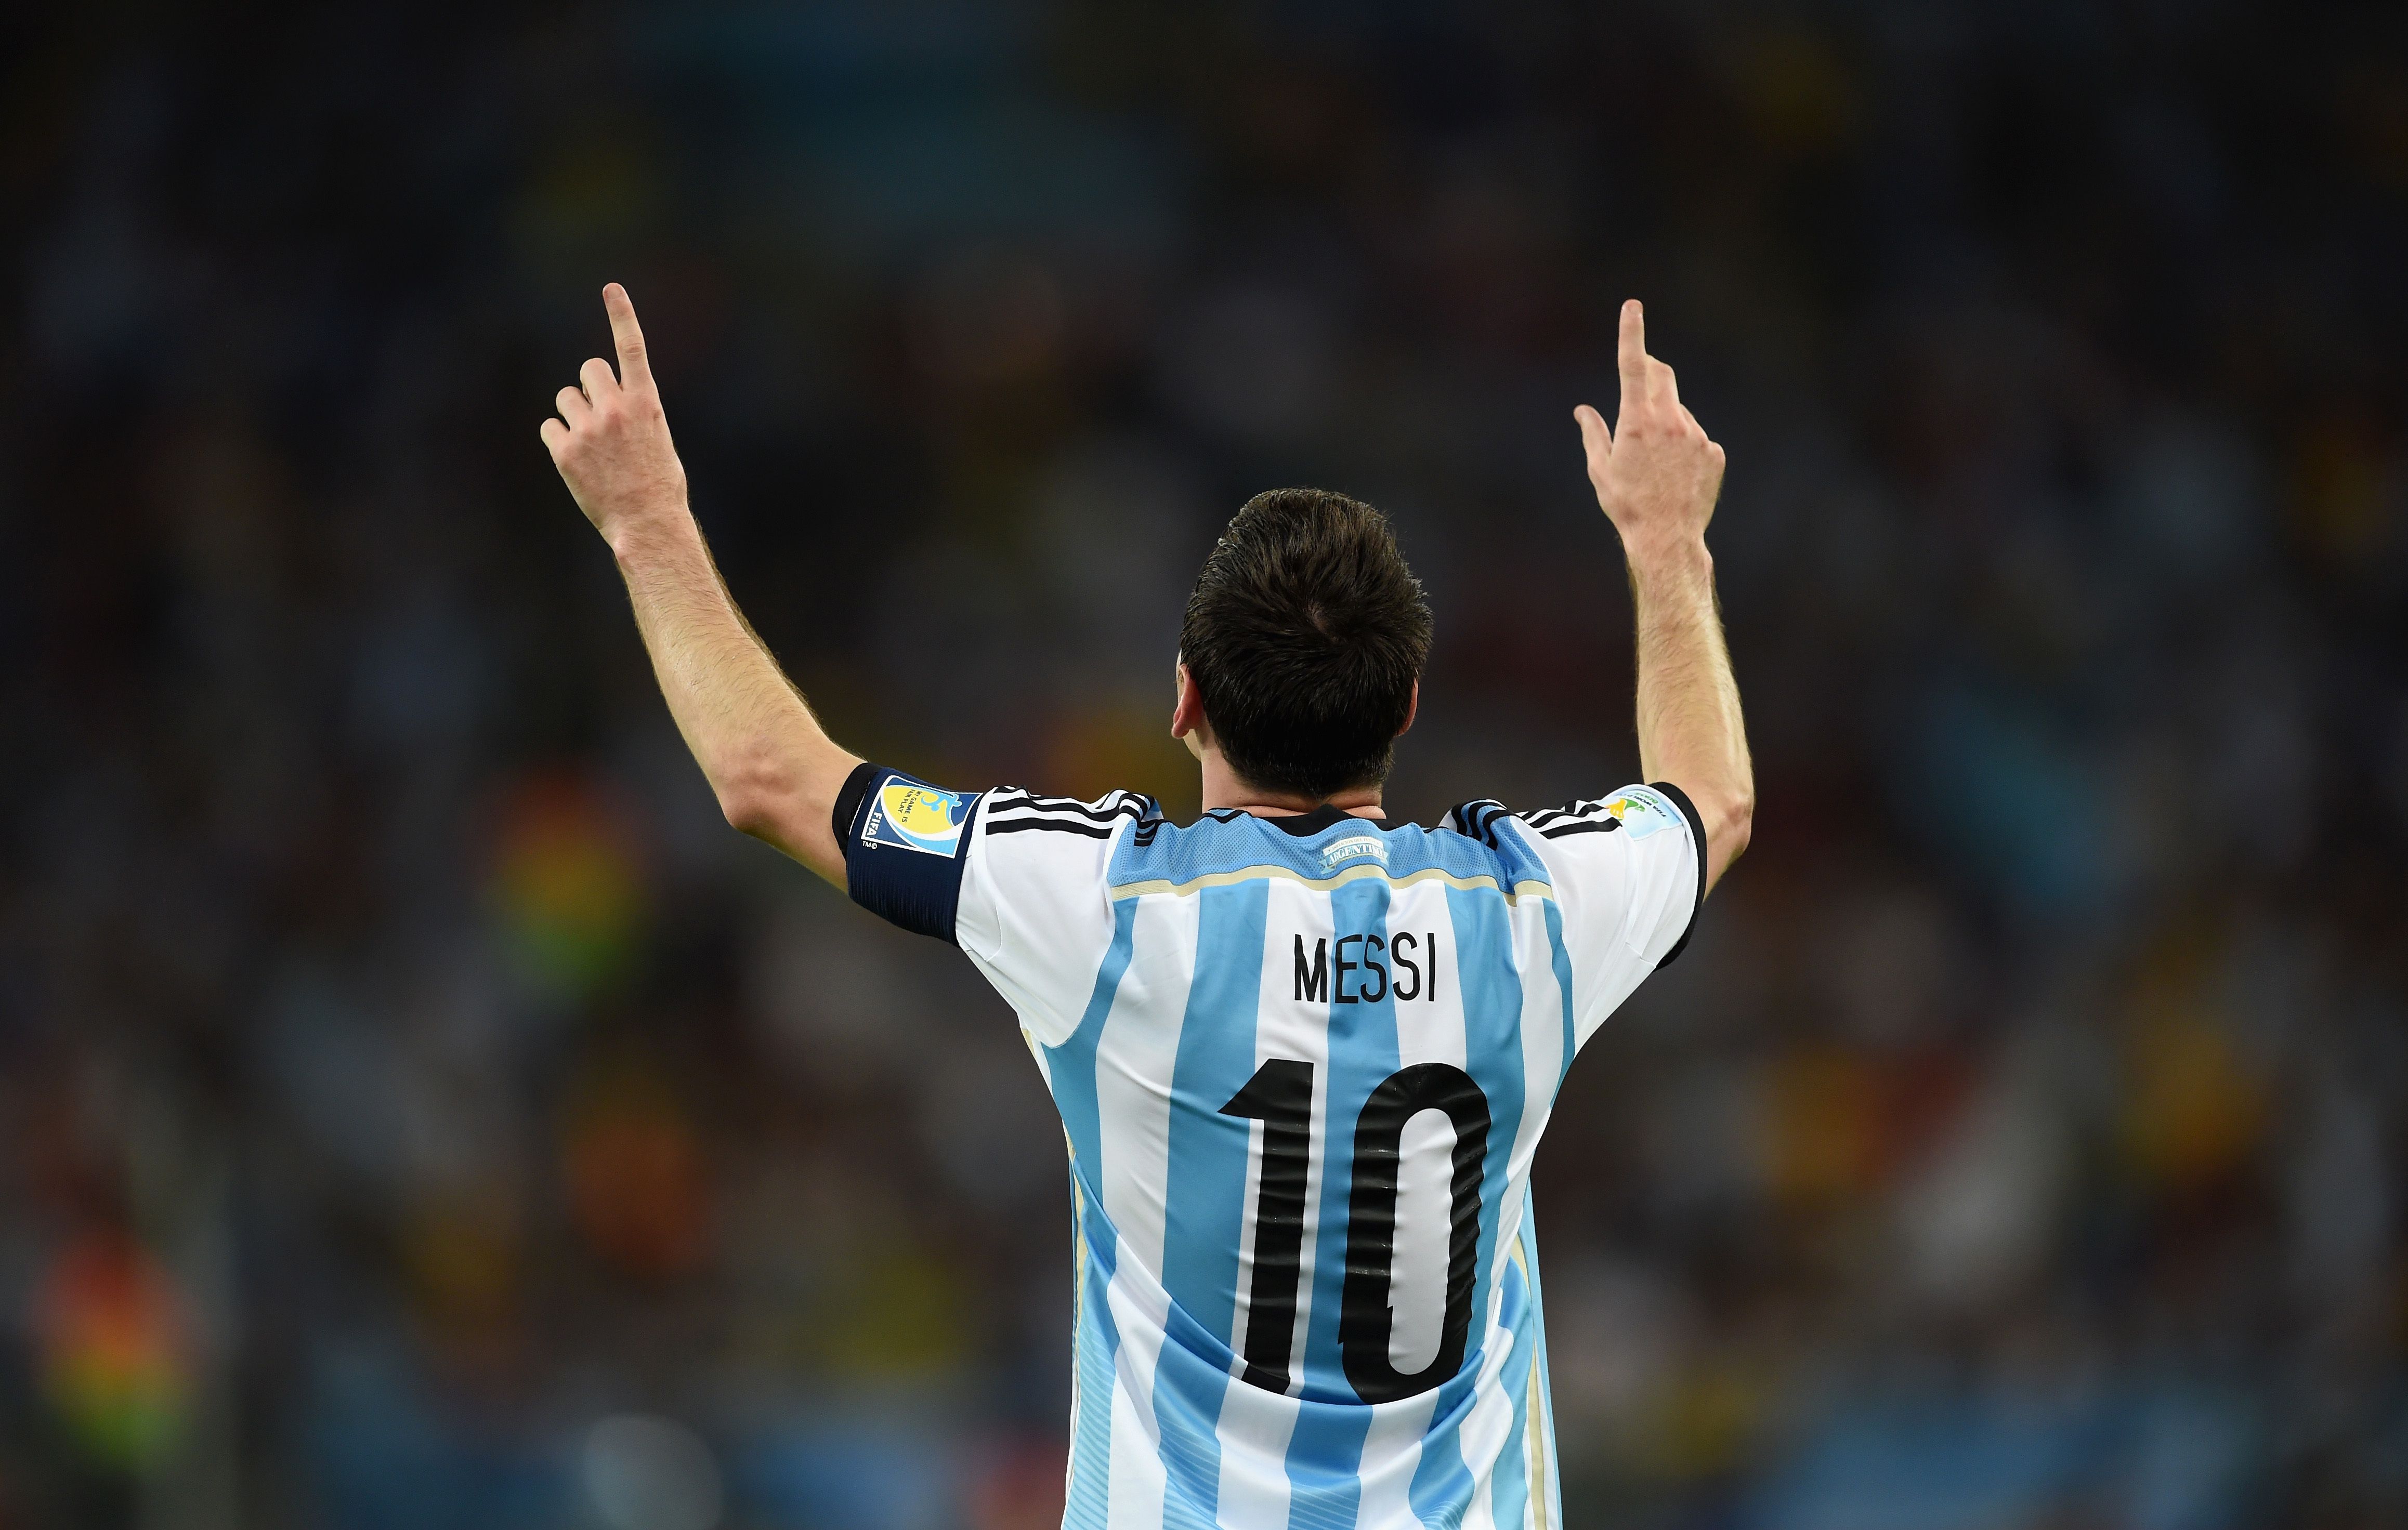 Title Sports Lionel Messi Soccer Player Wallpaper HD Pic Argentina HD Wallpaper